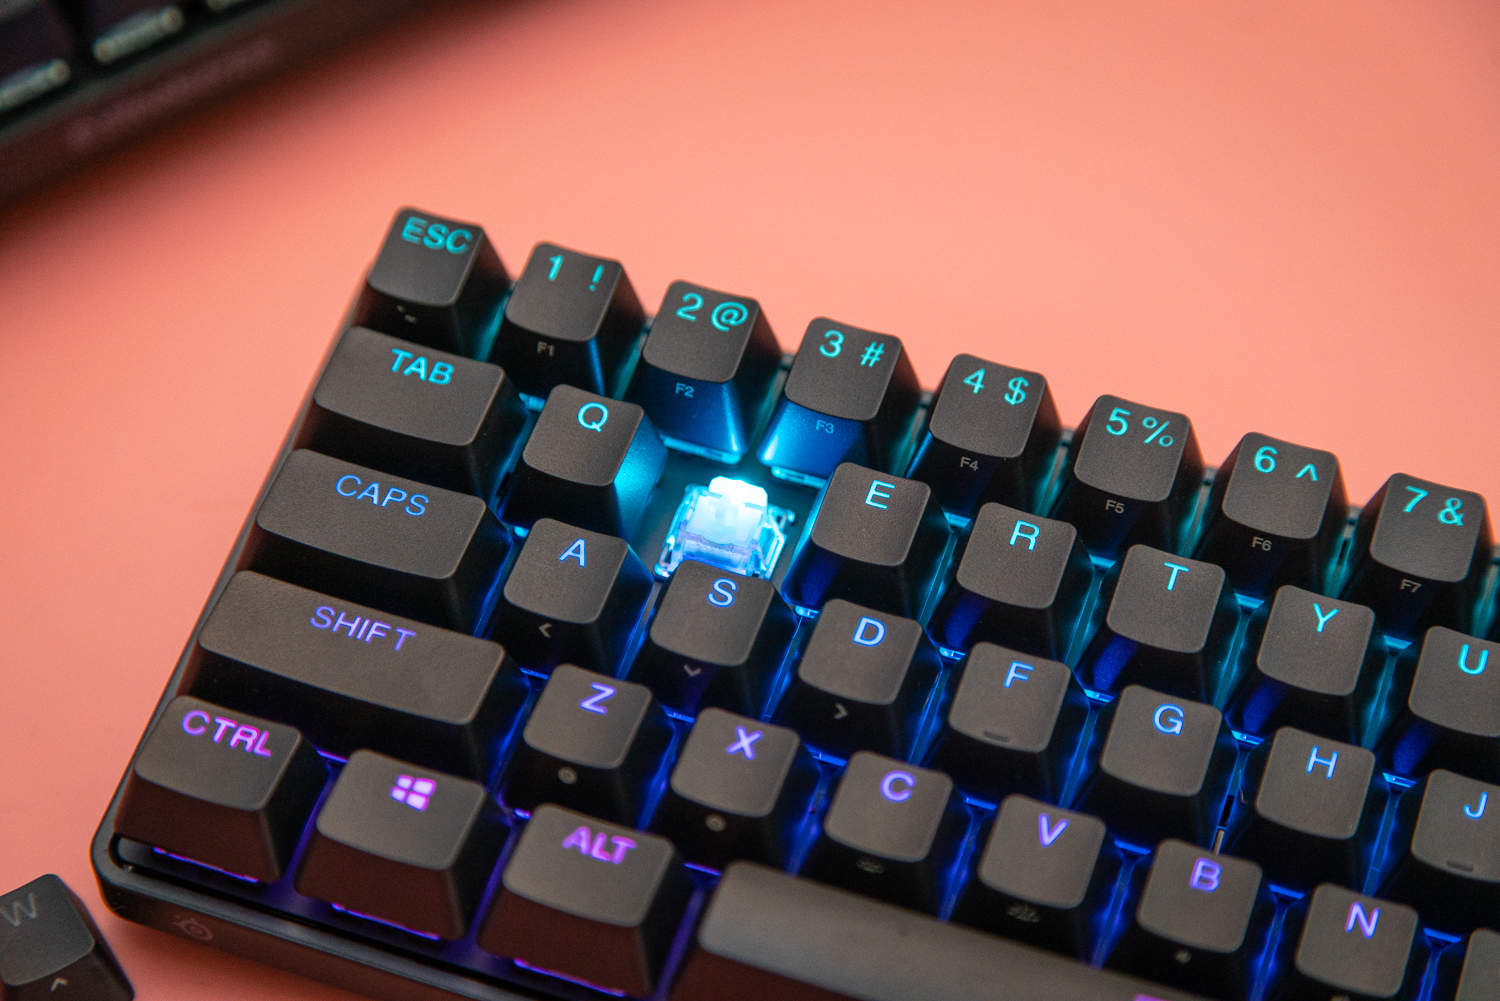 SteelSeries Apex Pro Mini keyboard review: A small but mighty